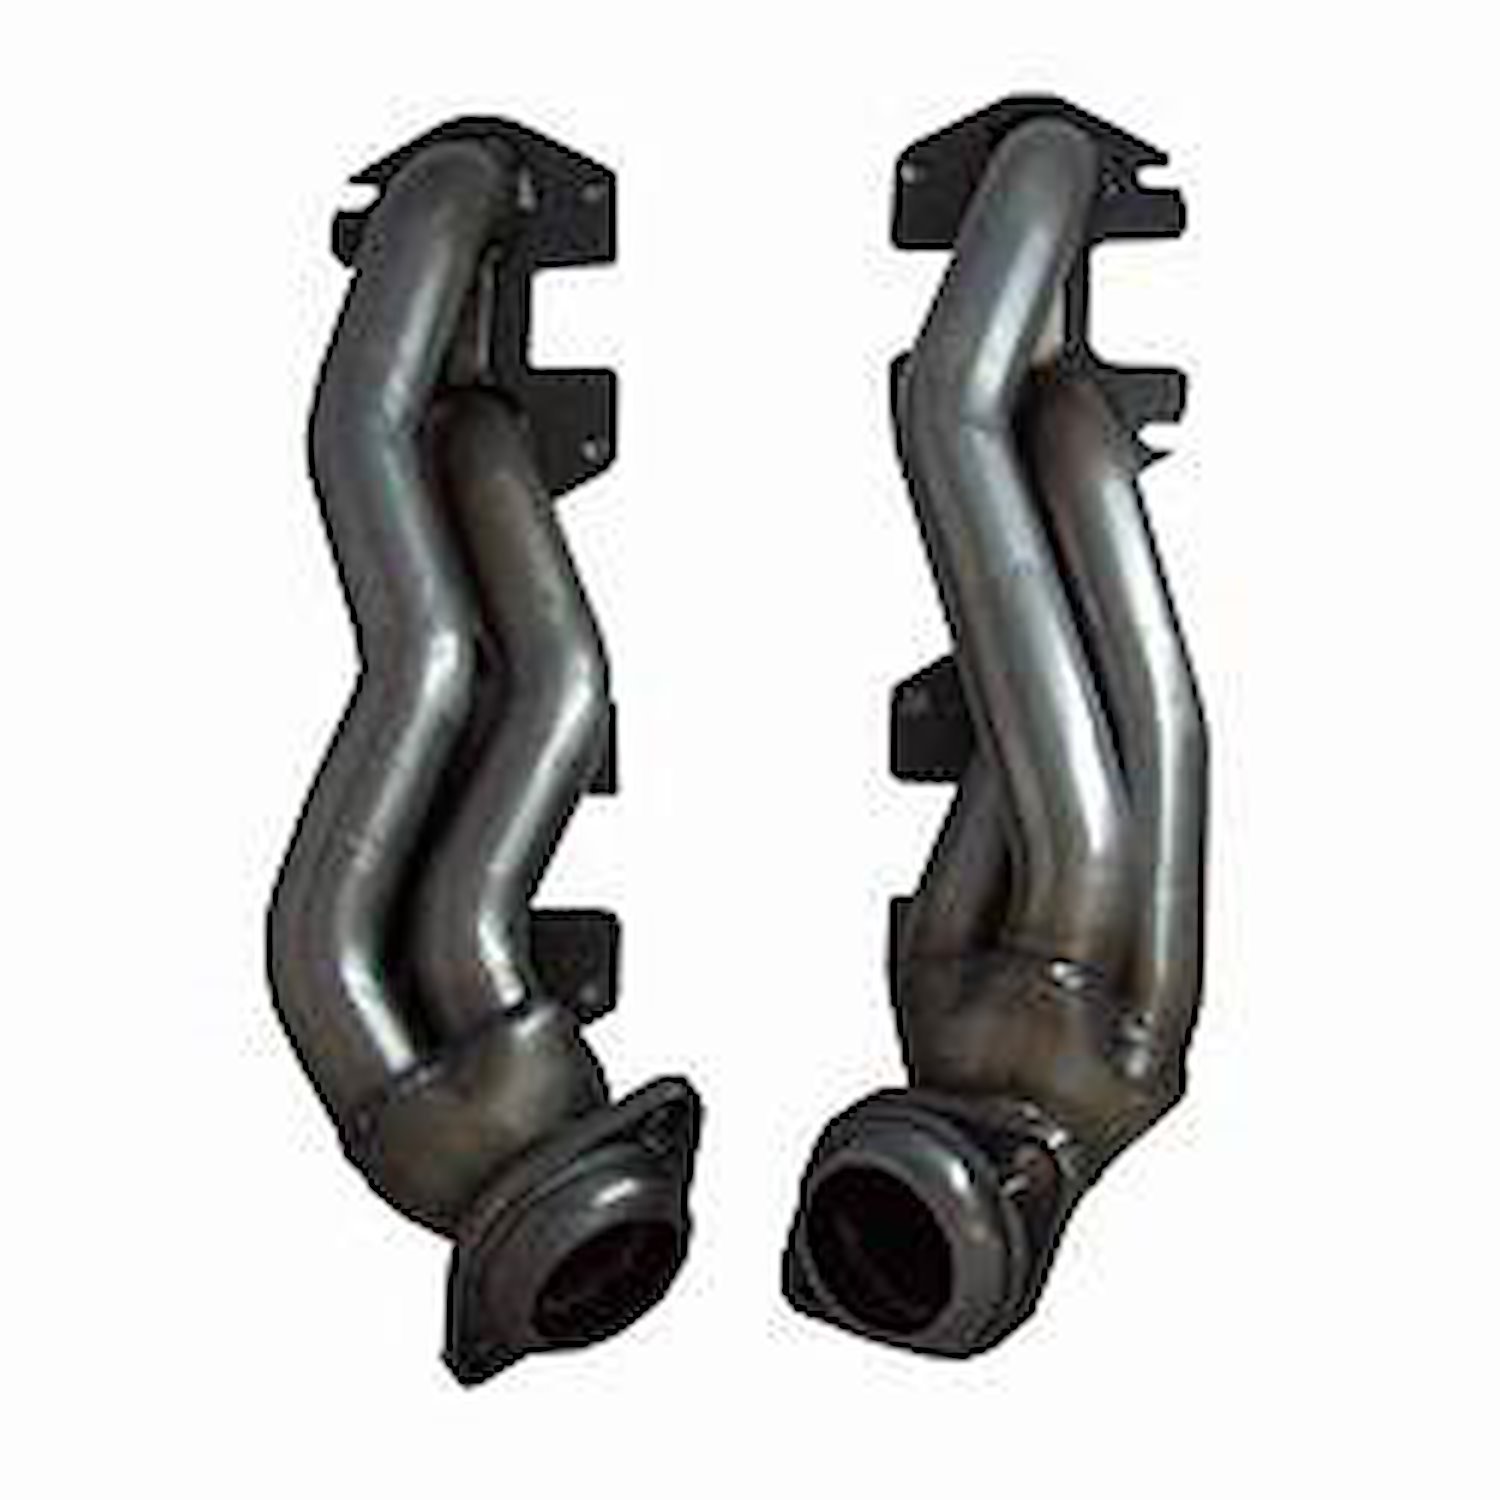 Stainless Steel Truck Headers 2006-10 Expedition